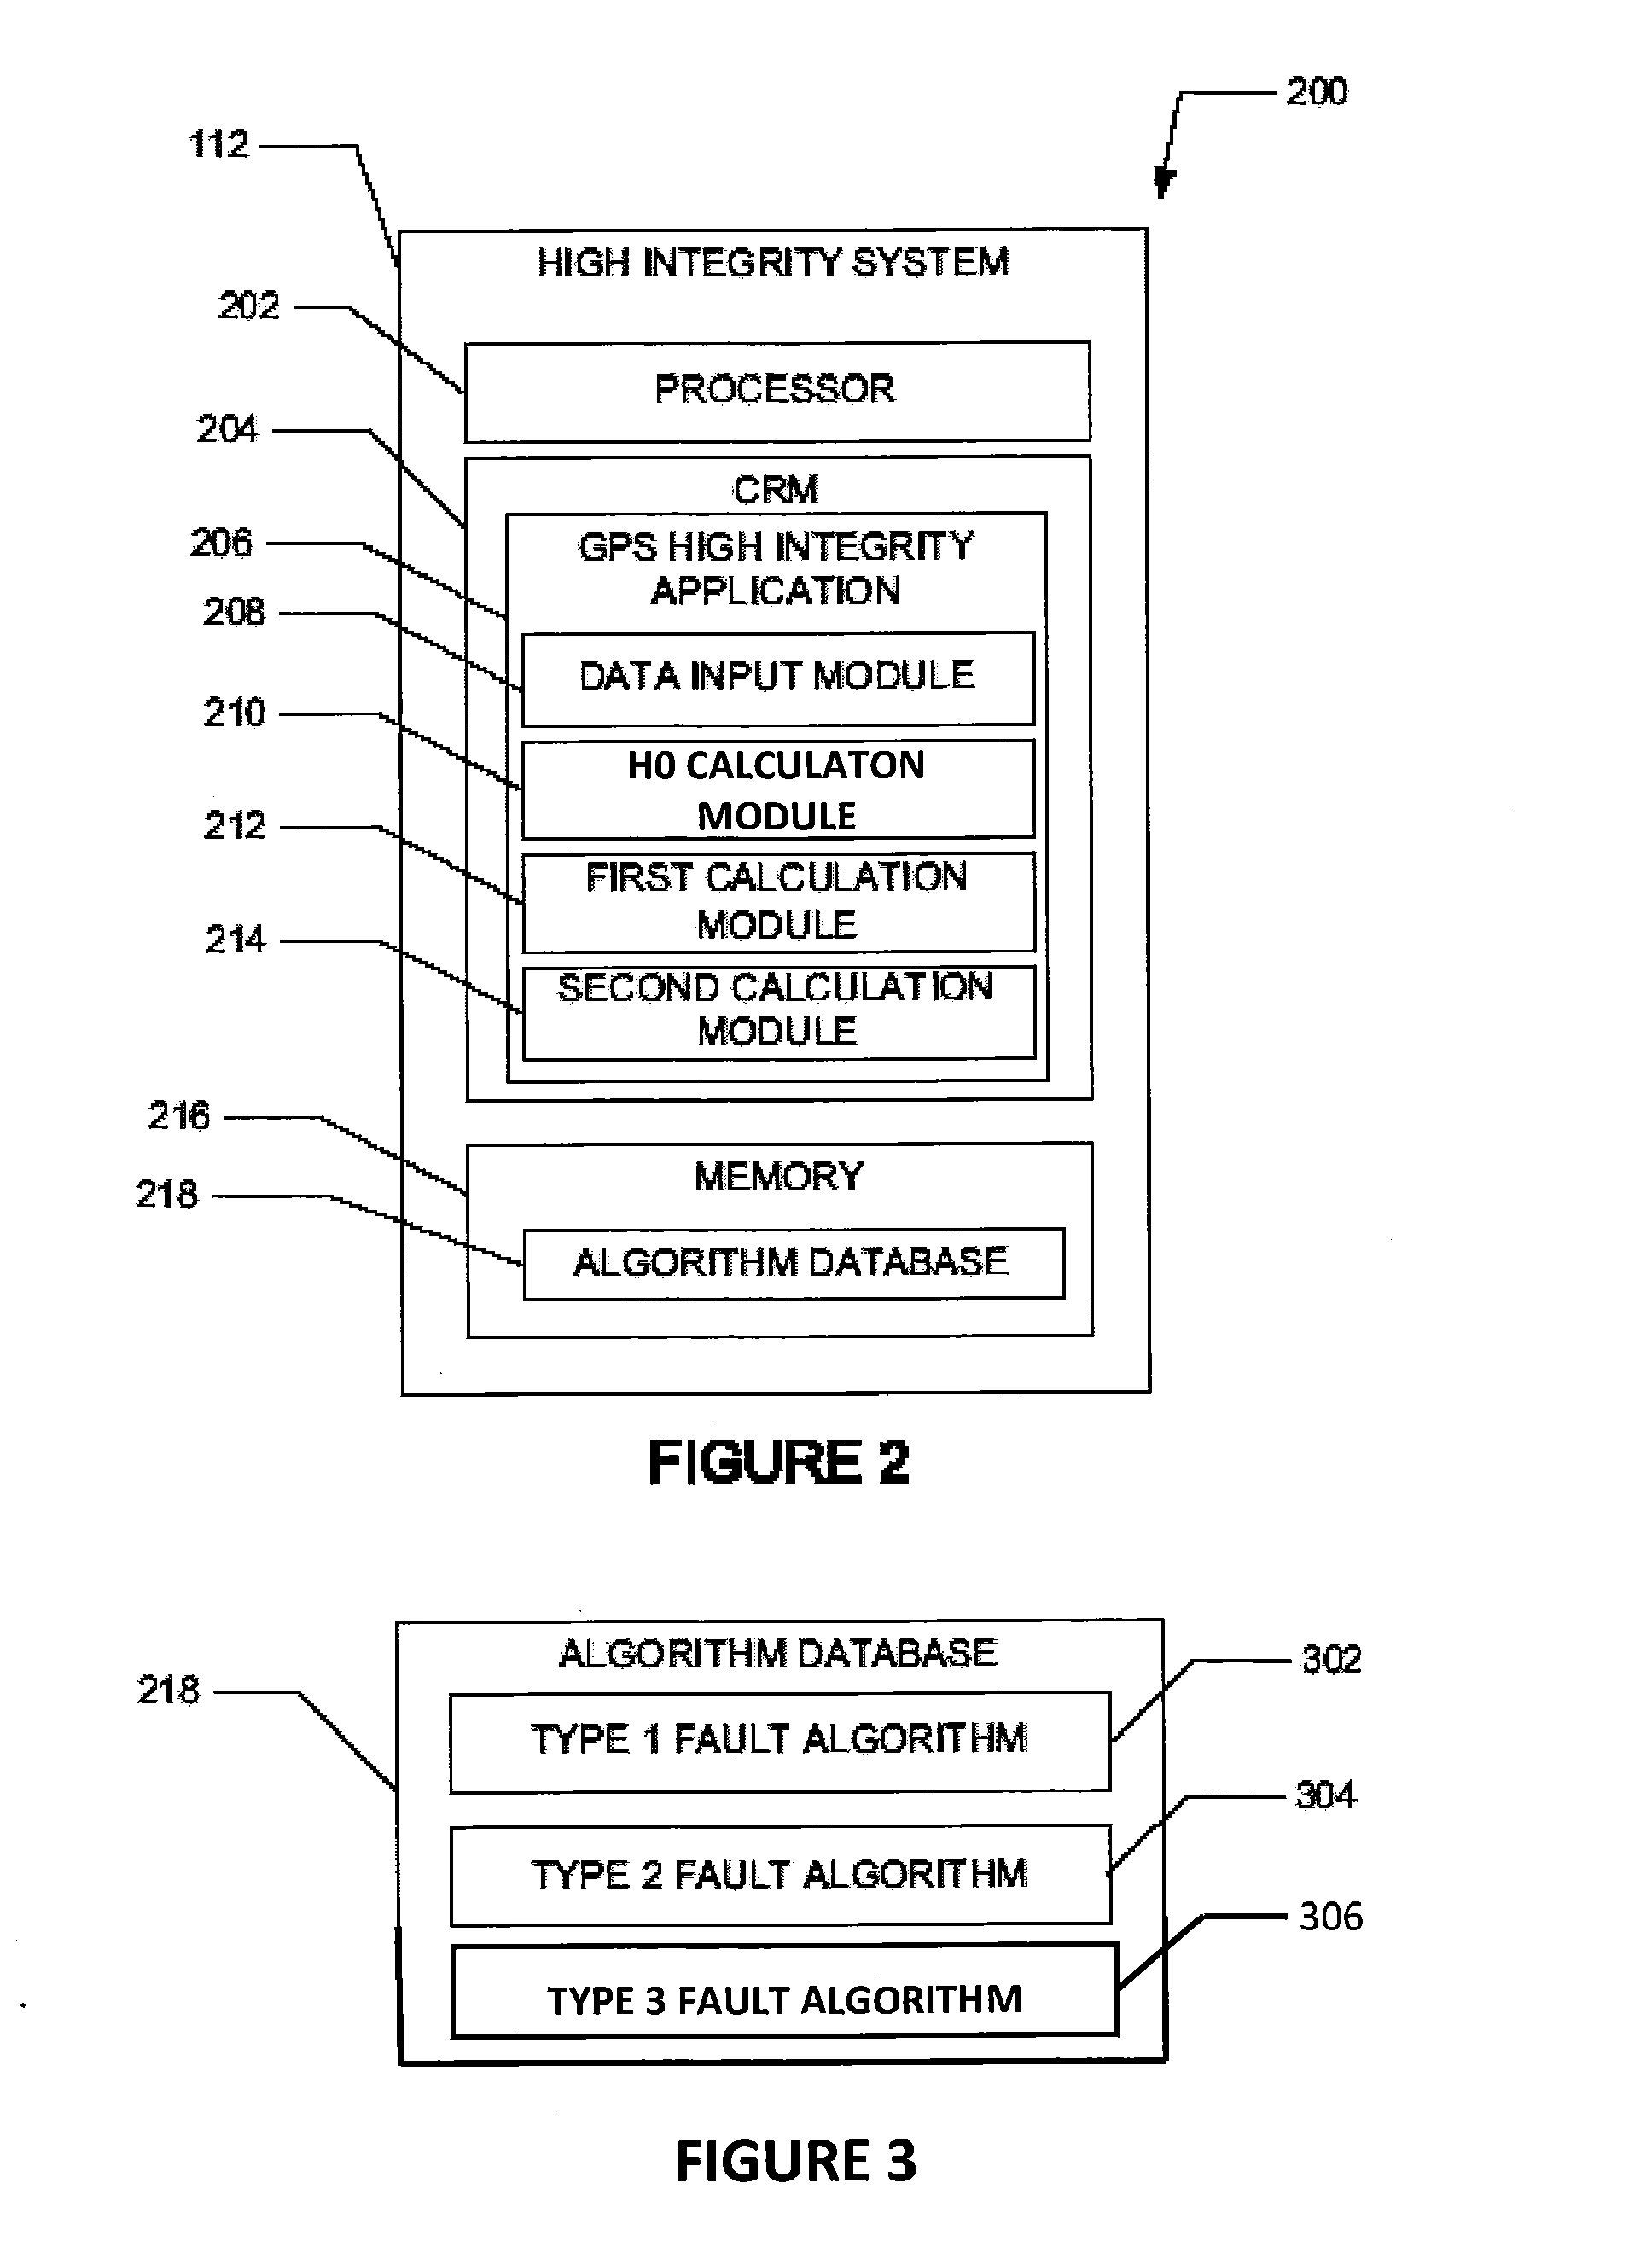 Method to handle single failure GPS faults in high integrity relative positioning systems